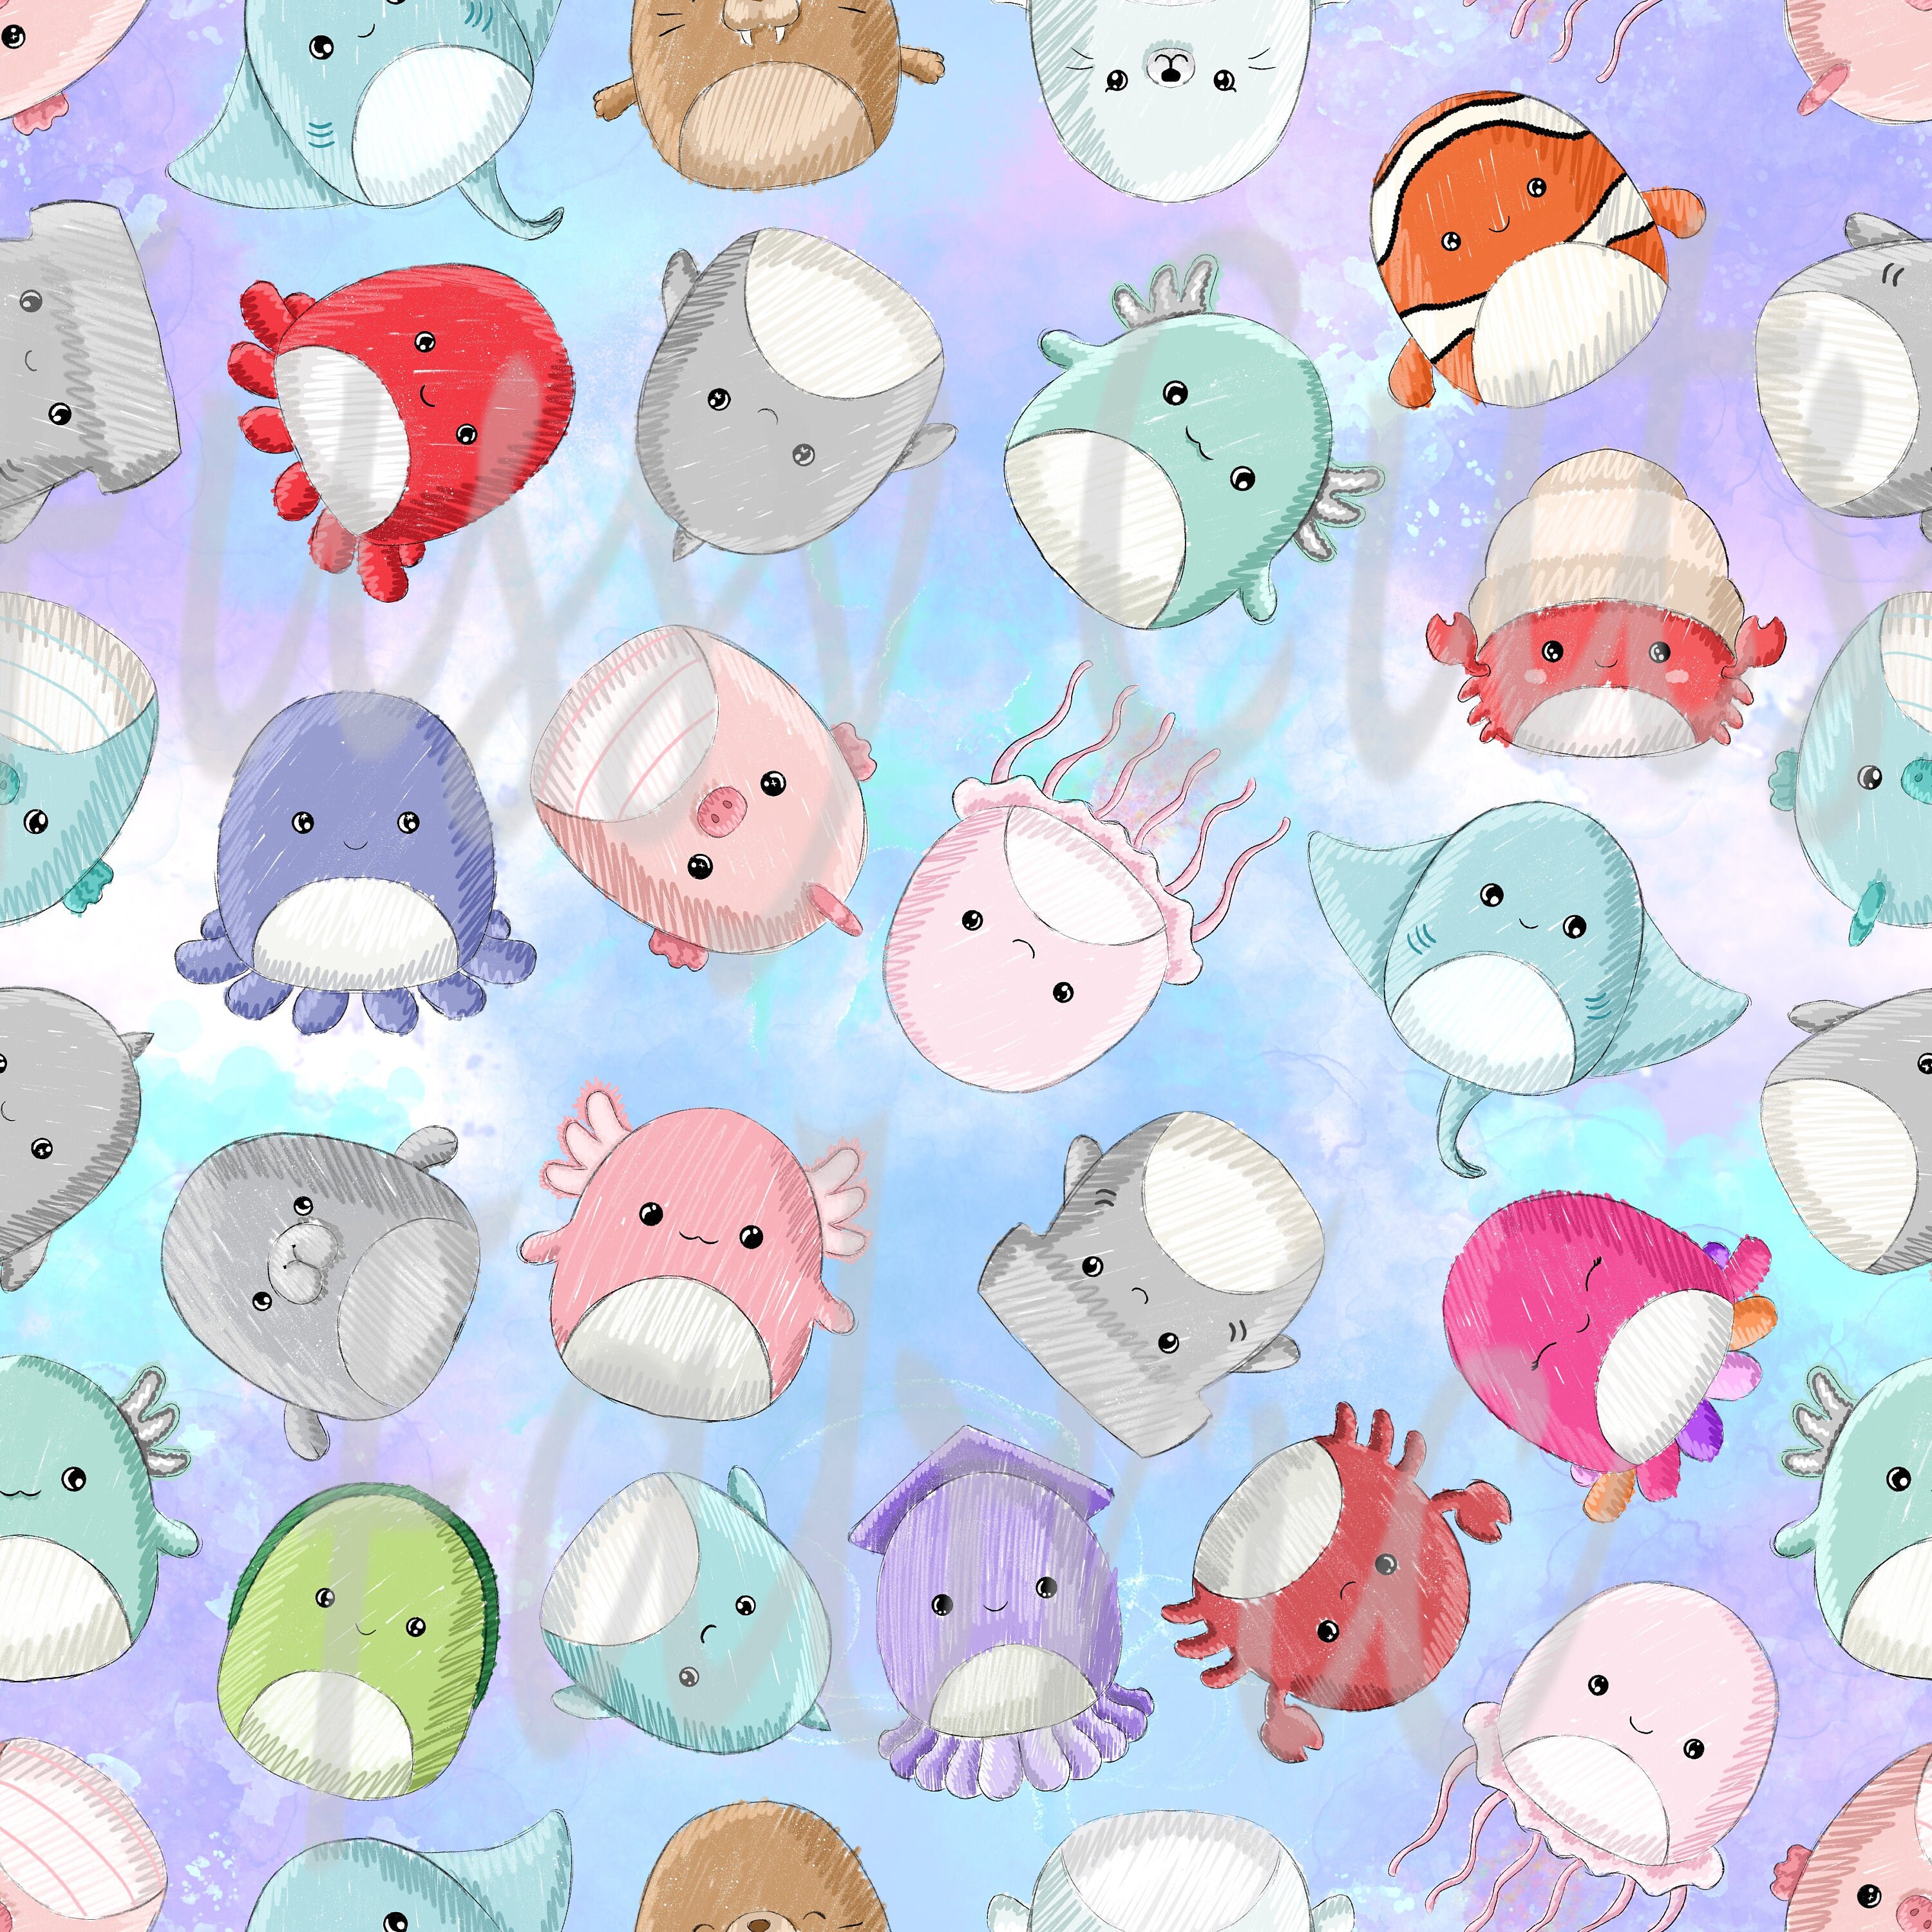 Avery Squishmallow Wallpaper by Nawnii on DeviantArt